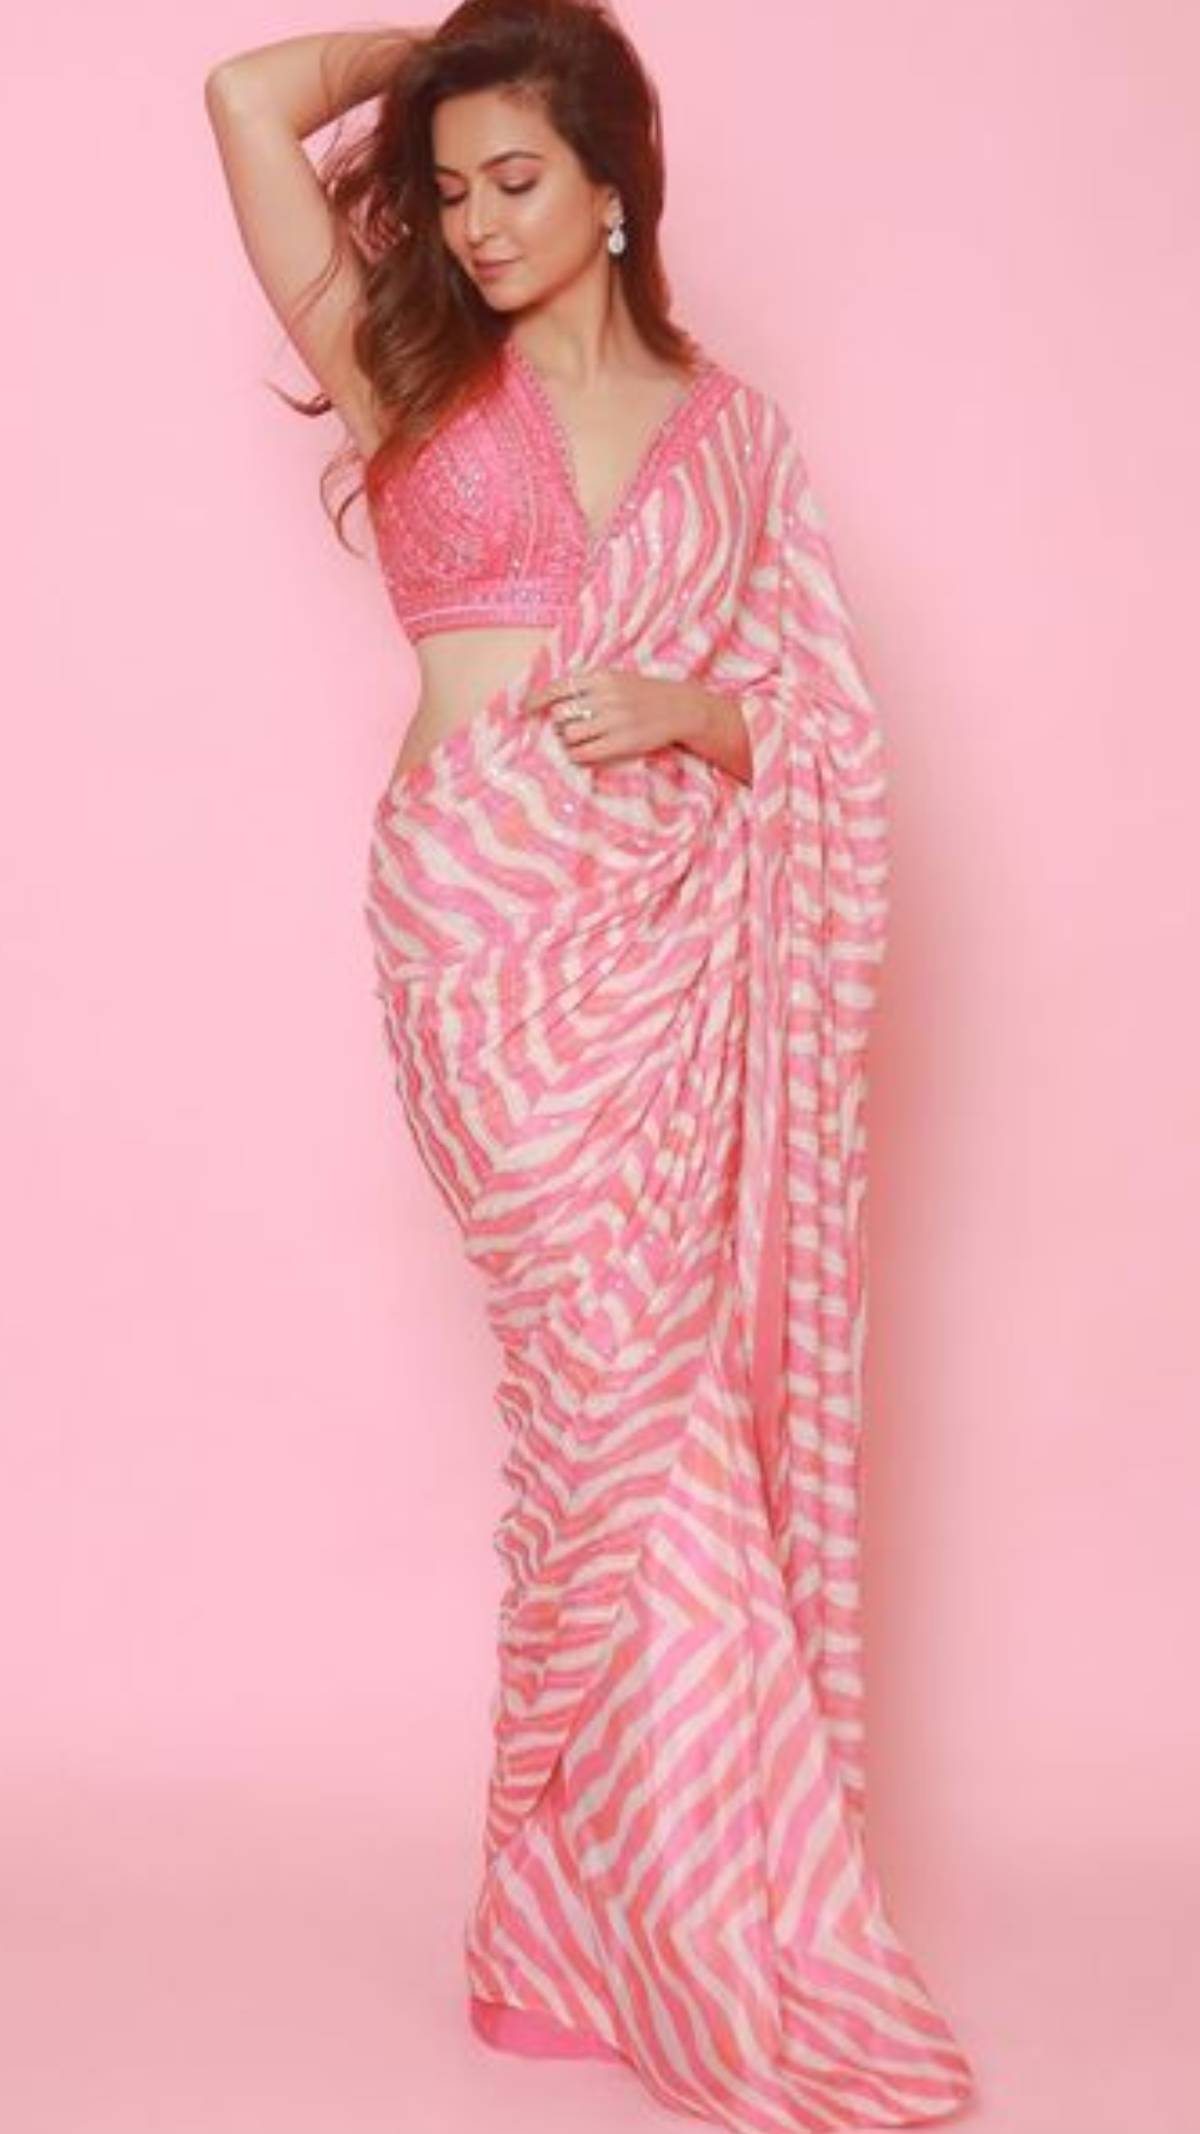 Kriti Kharbanda is a sight to behold in the pink striped saree